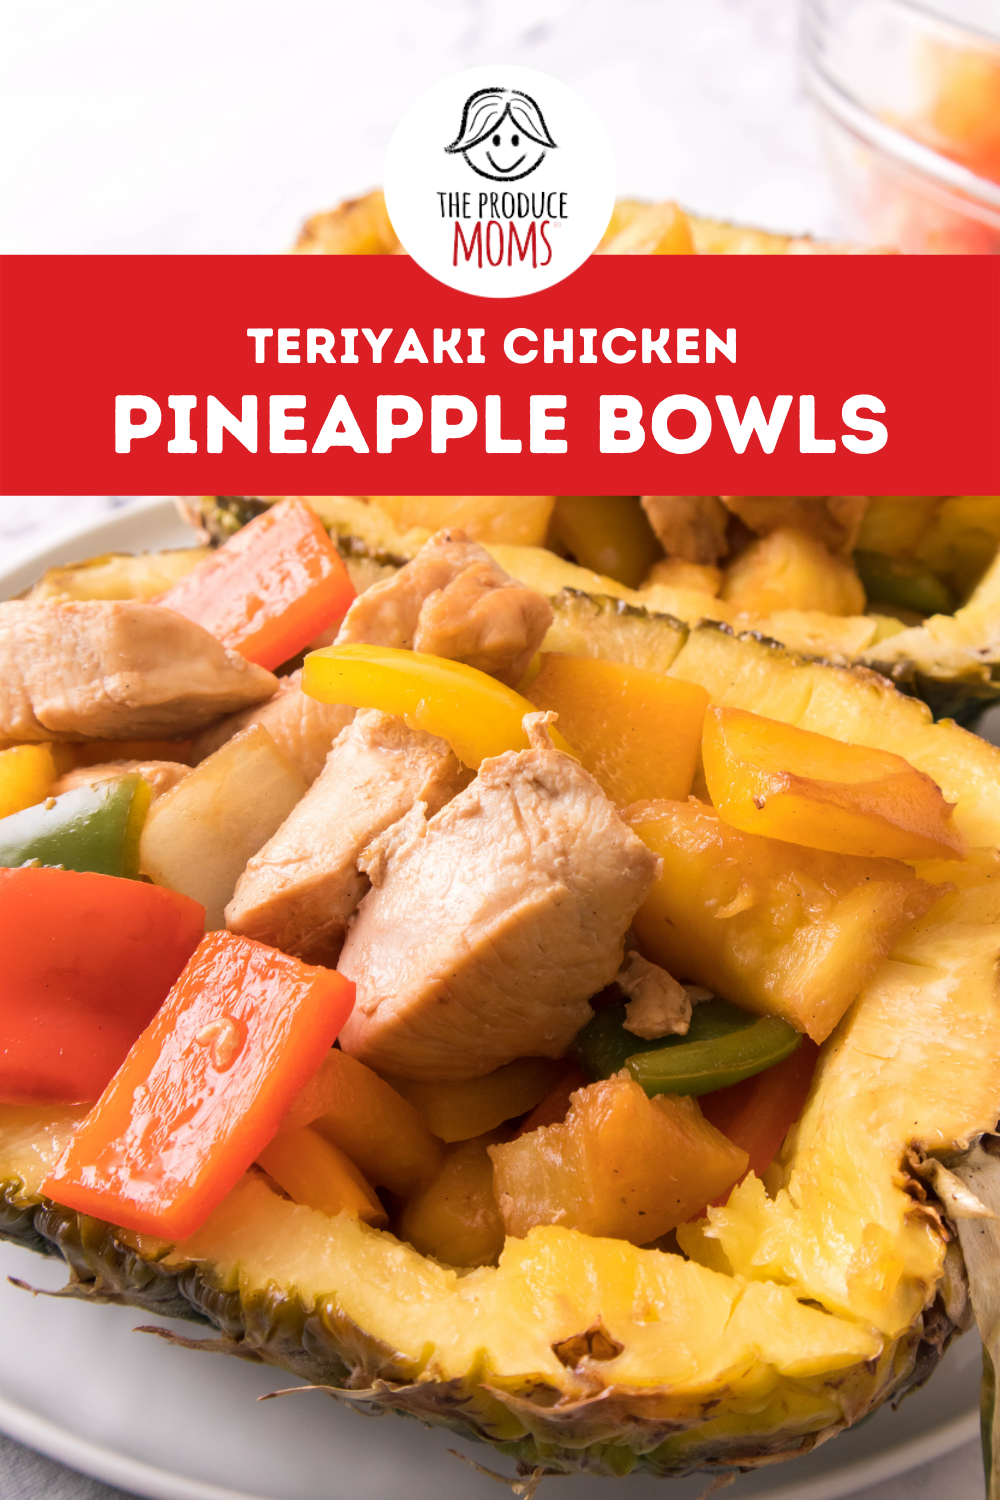 Pinterest pin: showing the finished product of Pineapple bowls filled with chicken and veggies